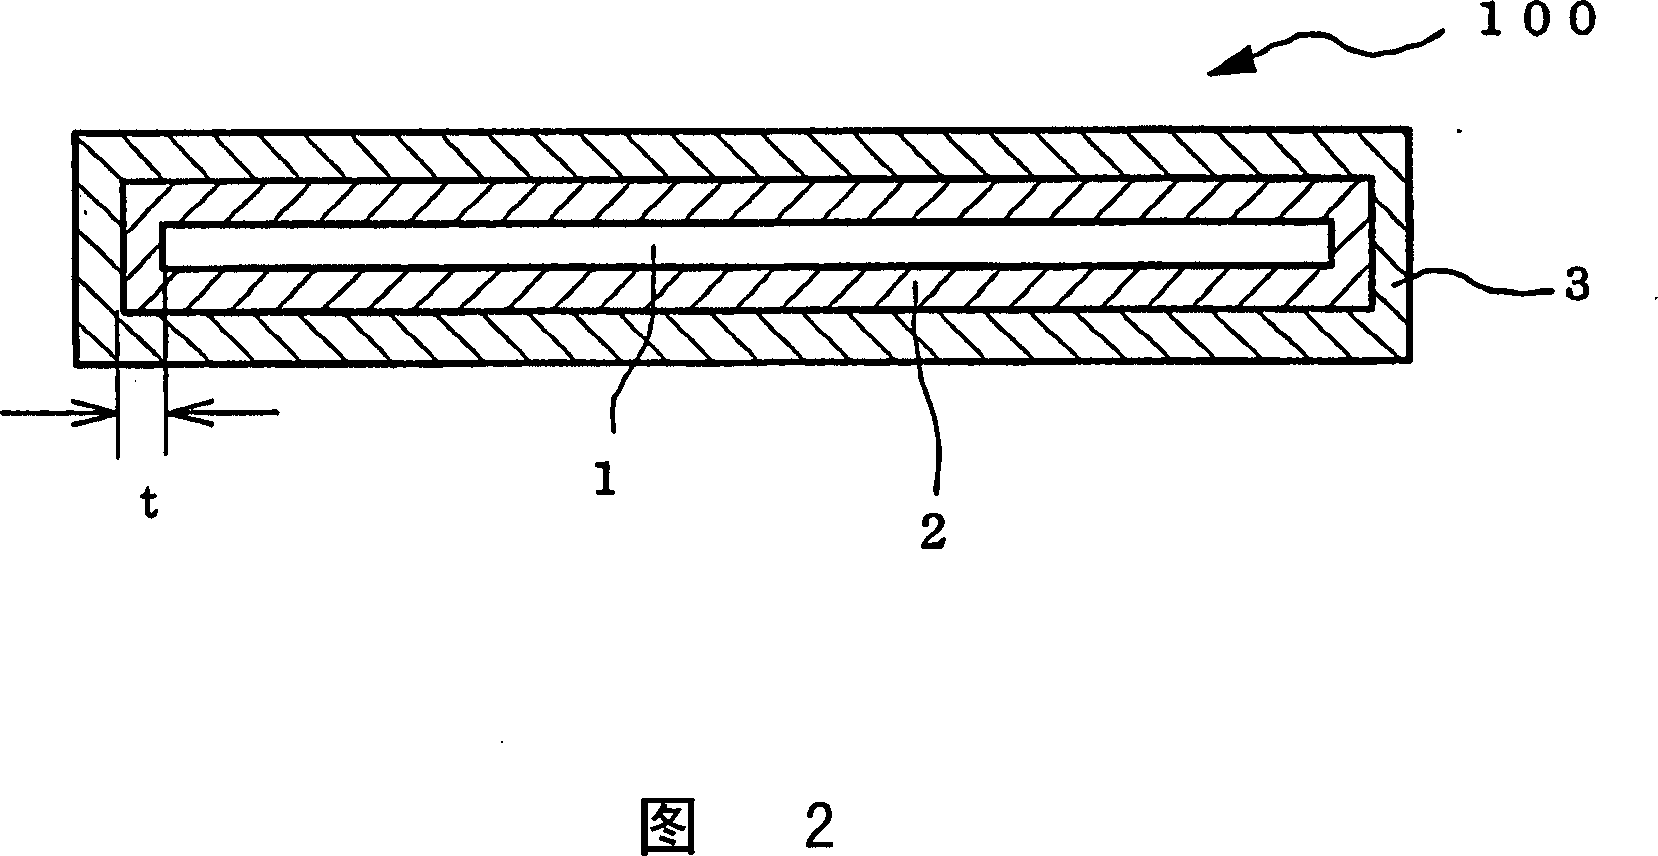 Tantalum carbide-covered carbon material and process for producing the same